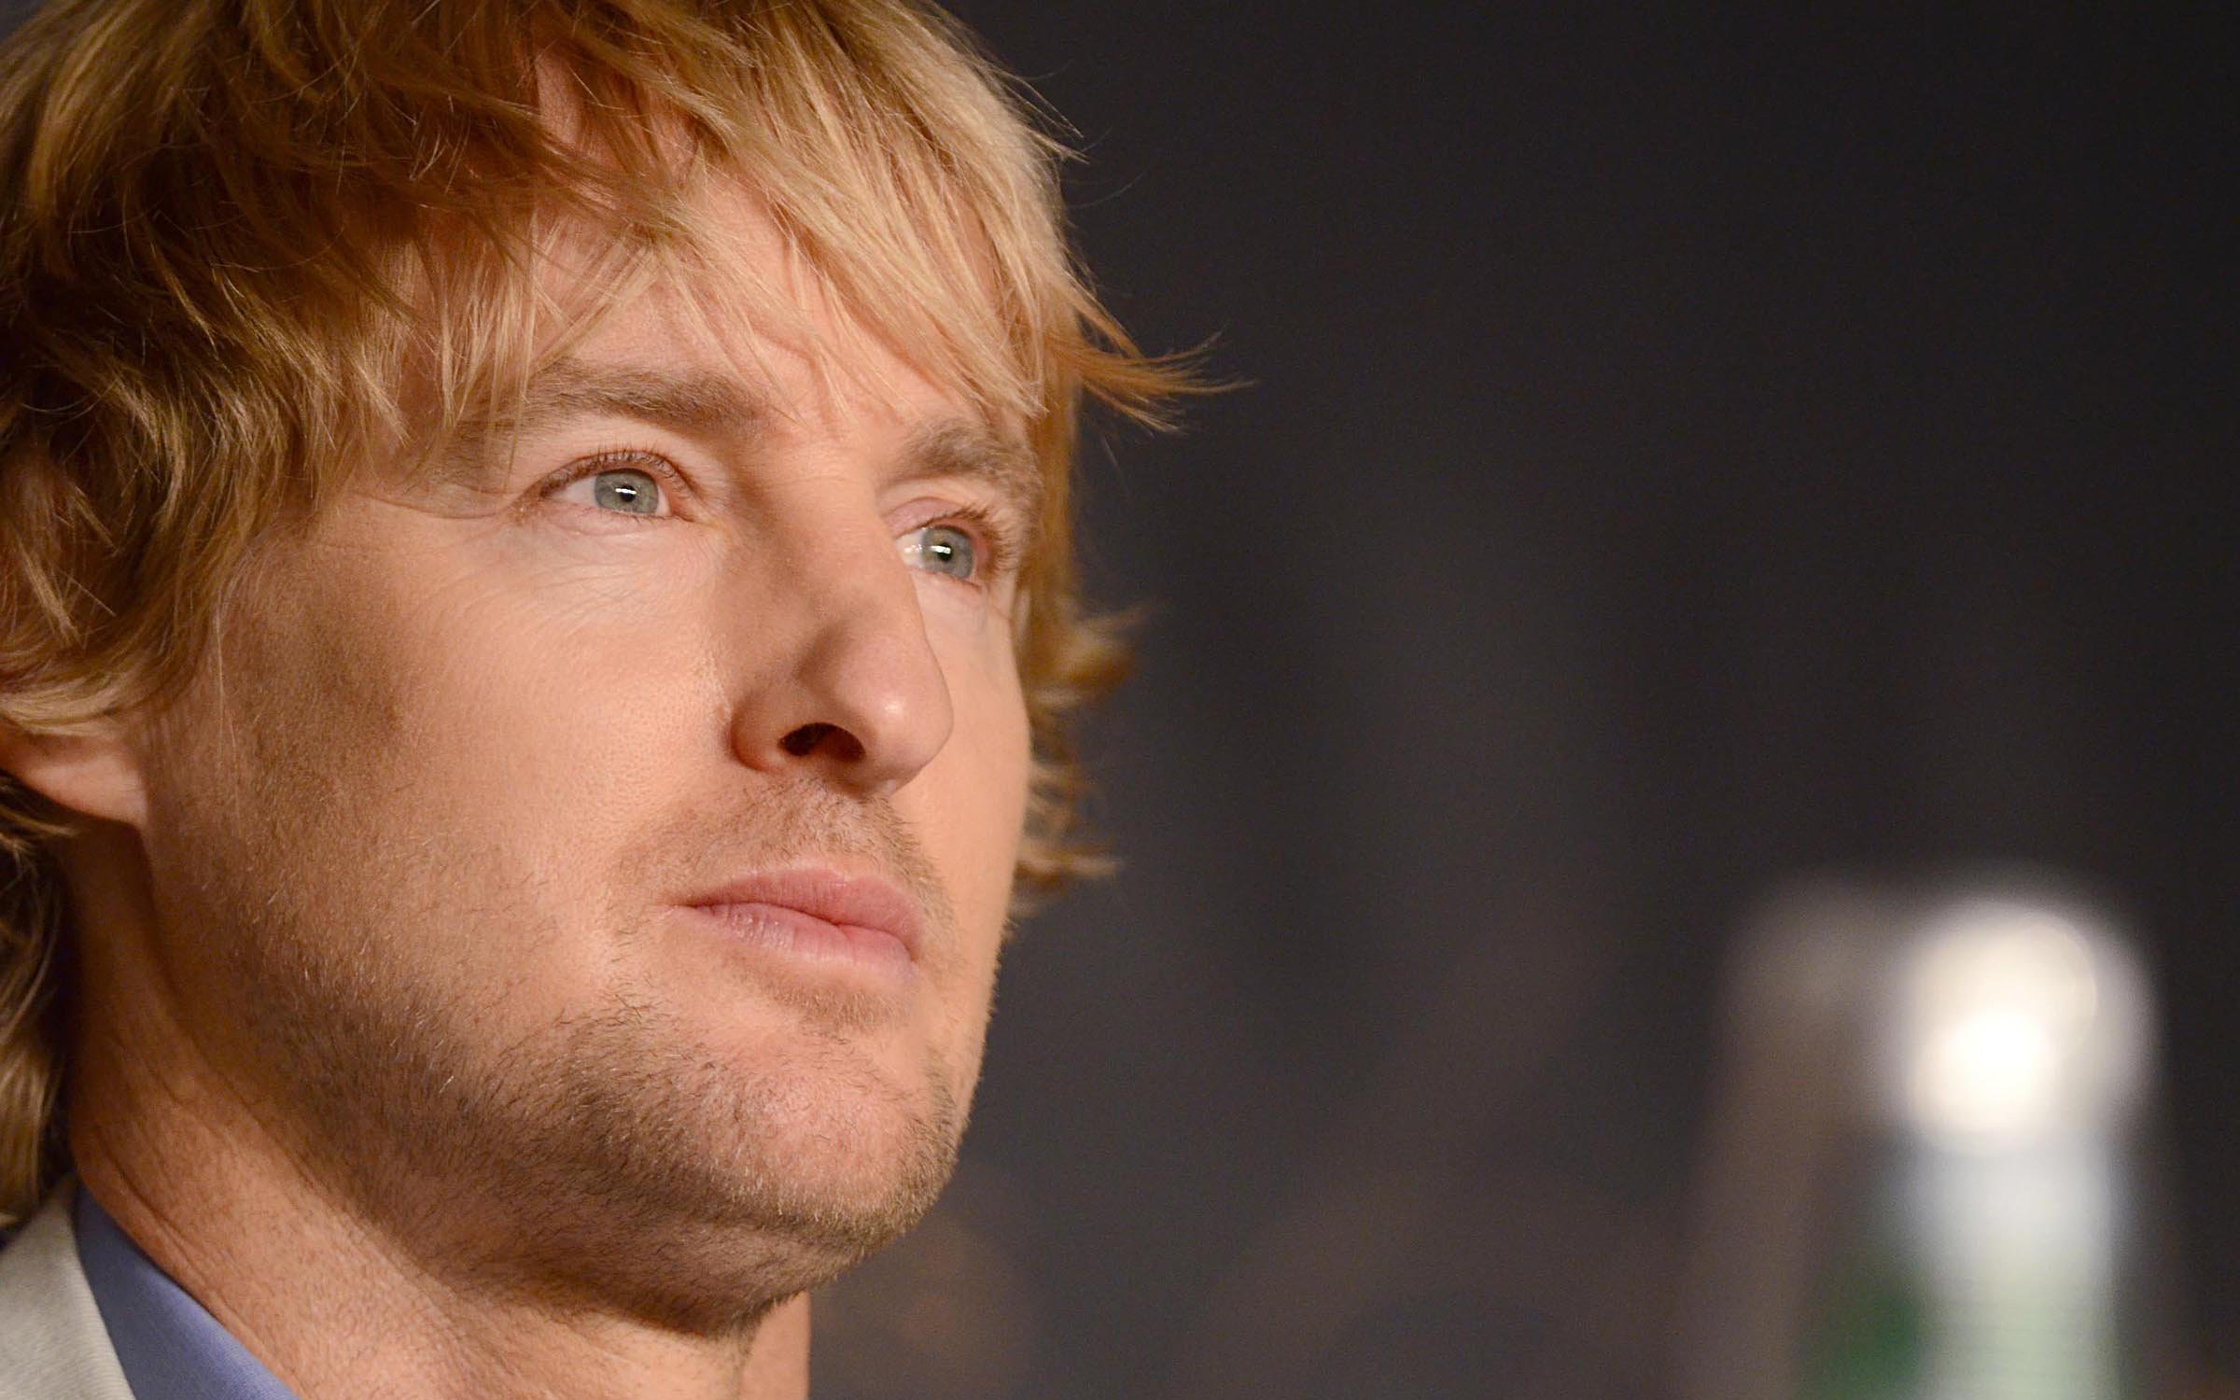 Owen Wilson is having another baby: Who's the mama? – SheKnows